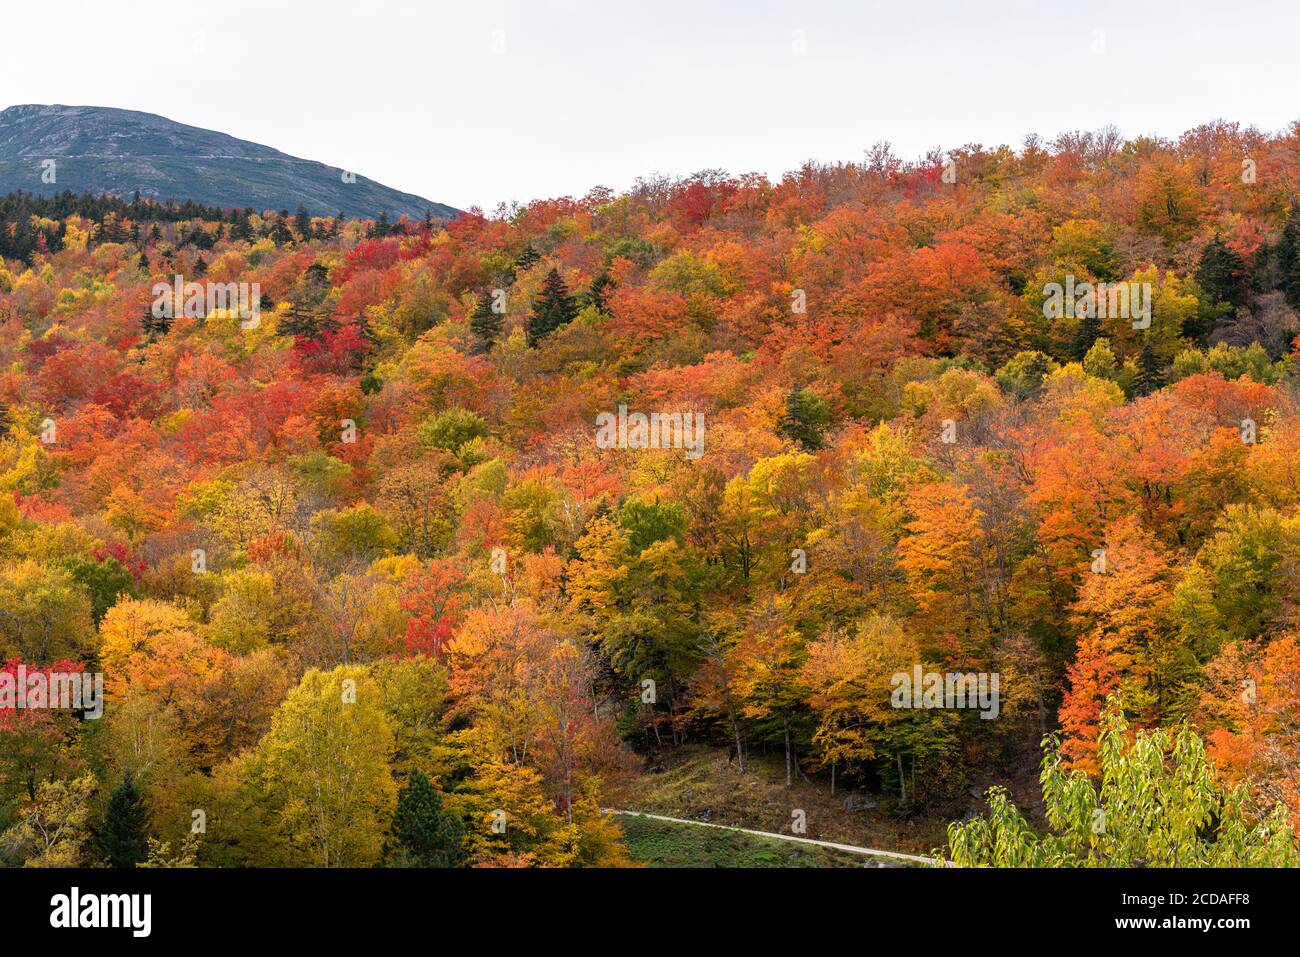 Hillside colourful deciduous forest at the peak of fall foliage on a cloudy autumn day Stock Photo